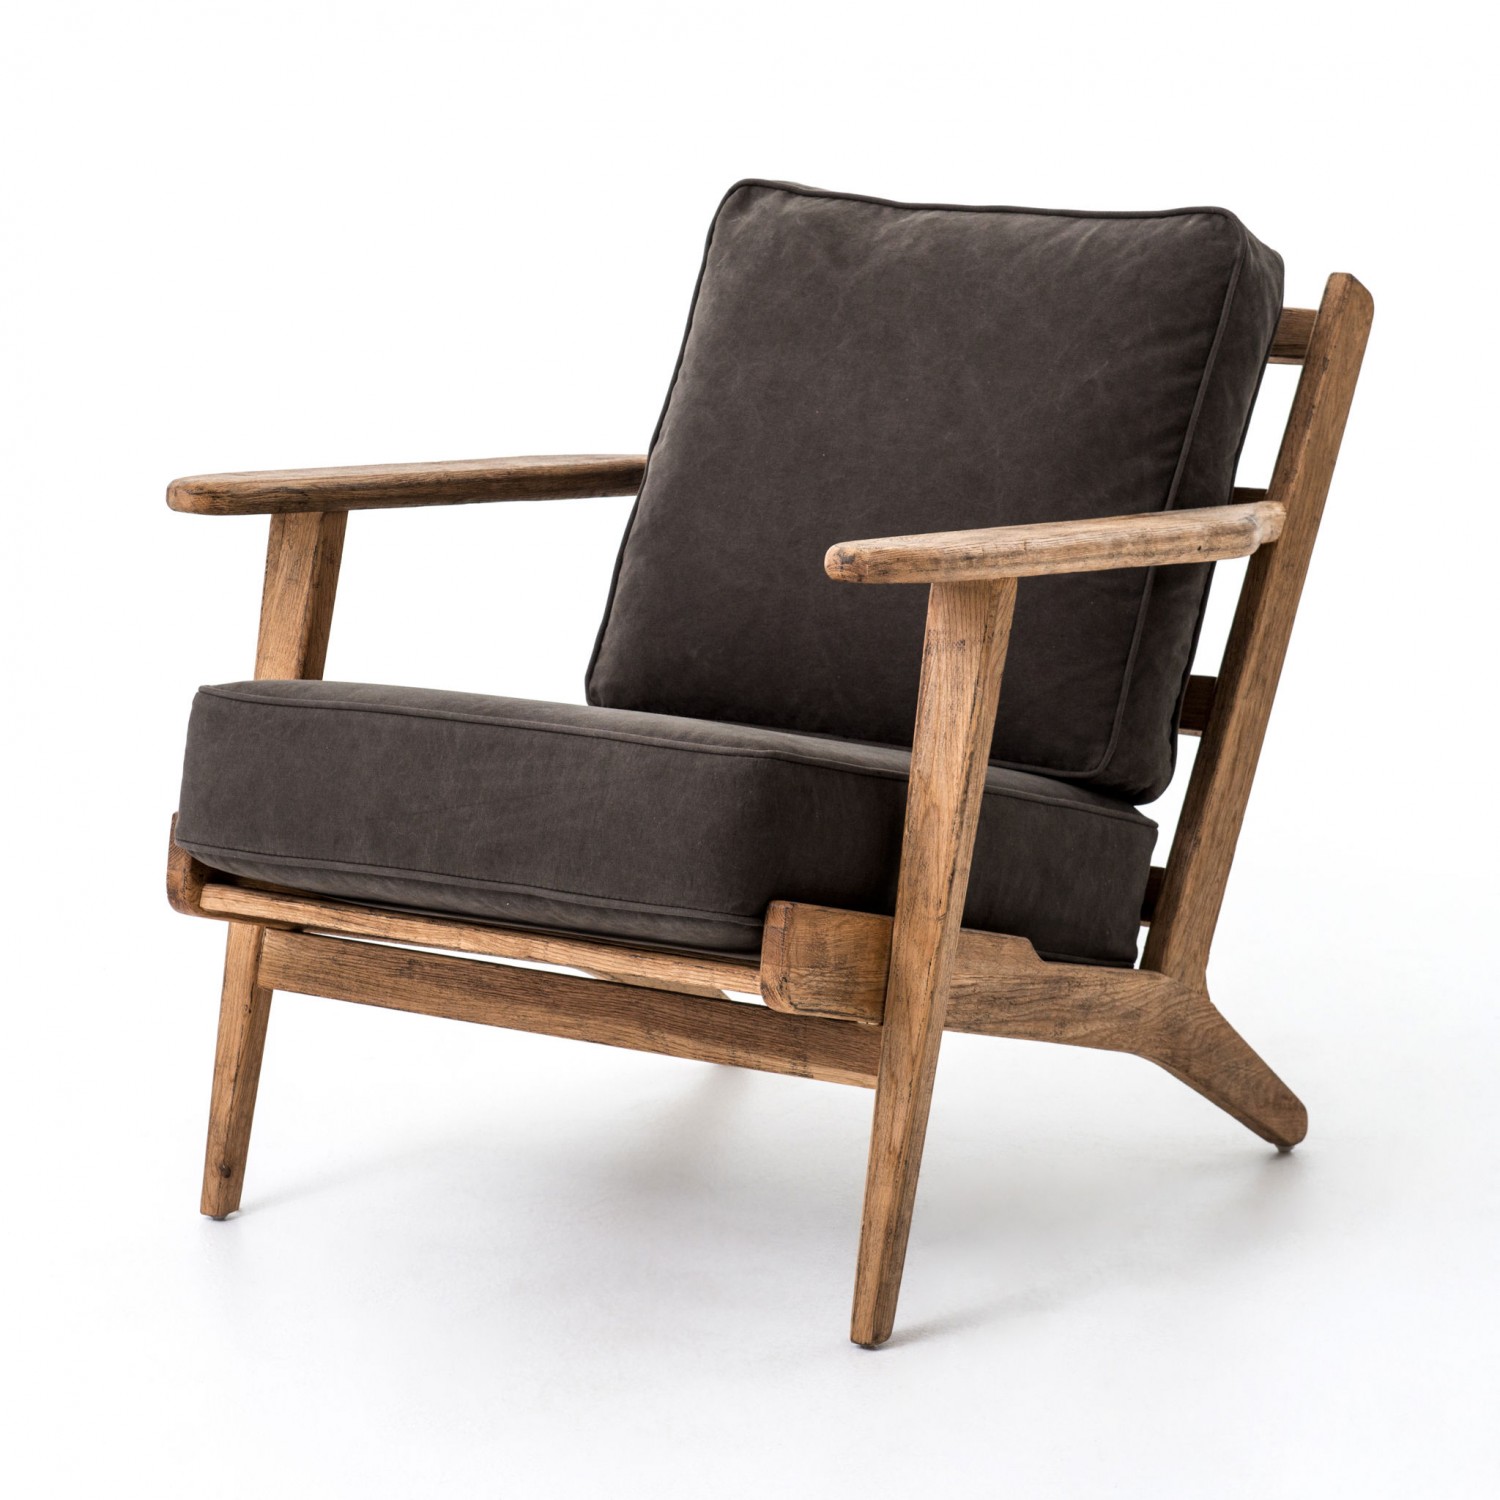 BROOKS LOUNGE CHAIR - More Options Available | Industrial Home